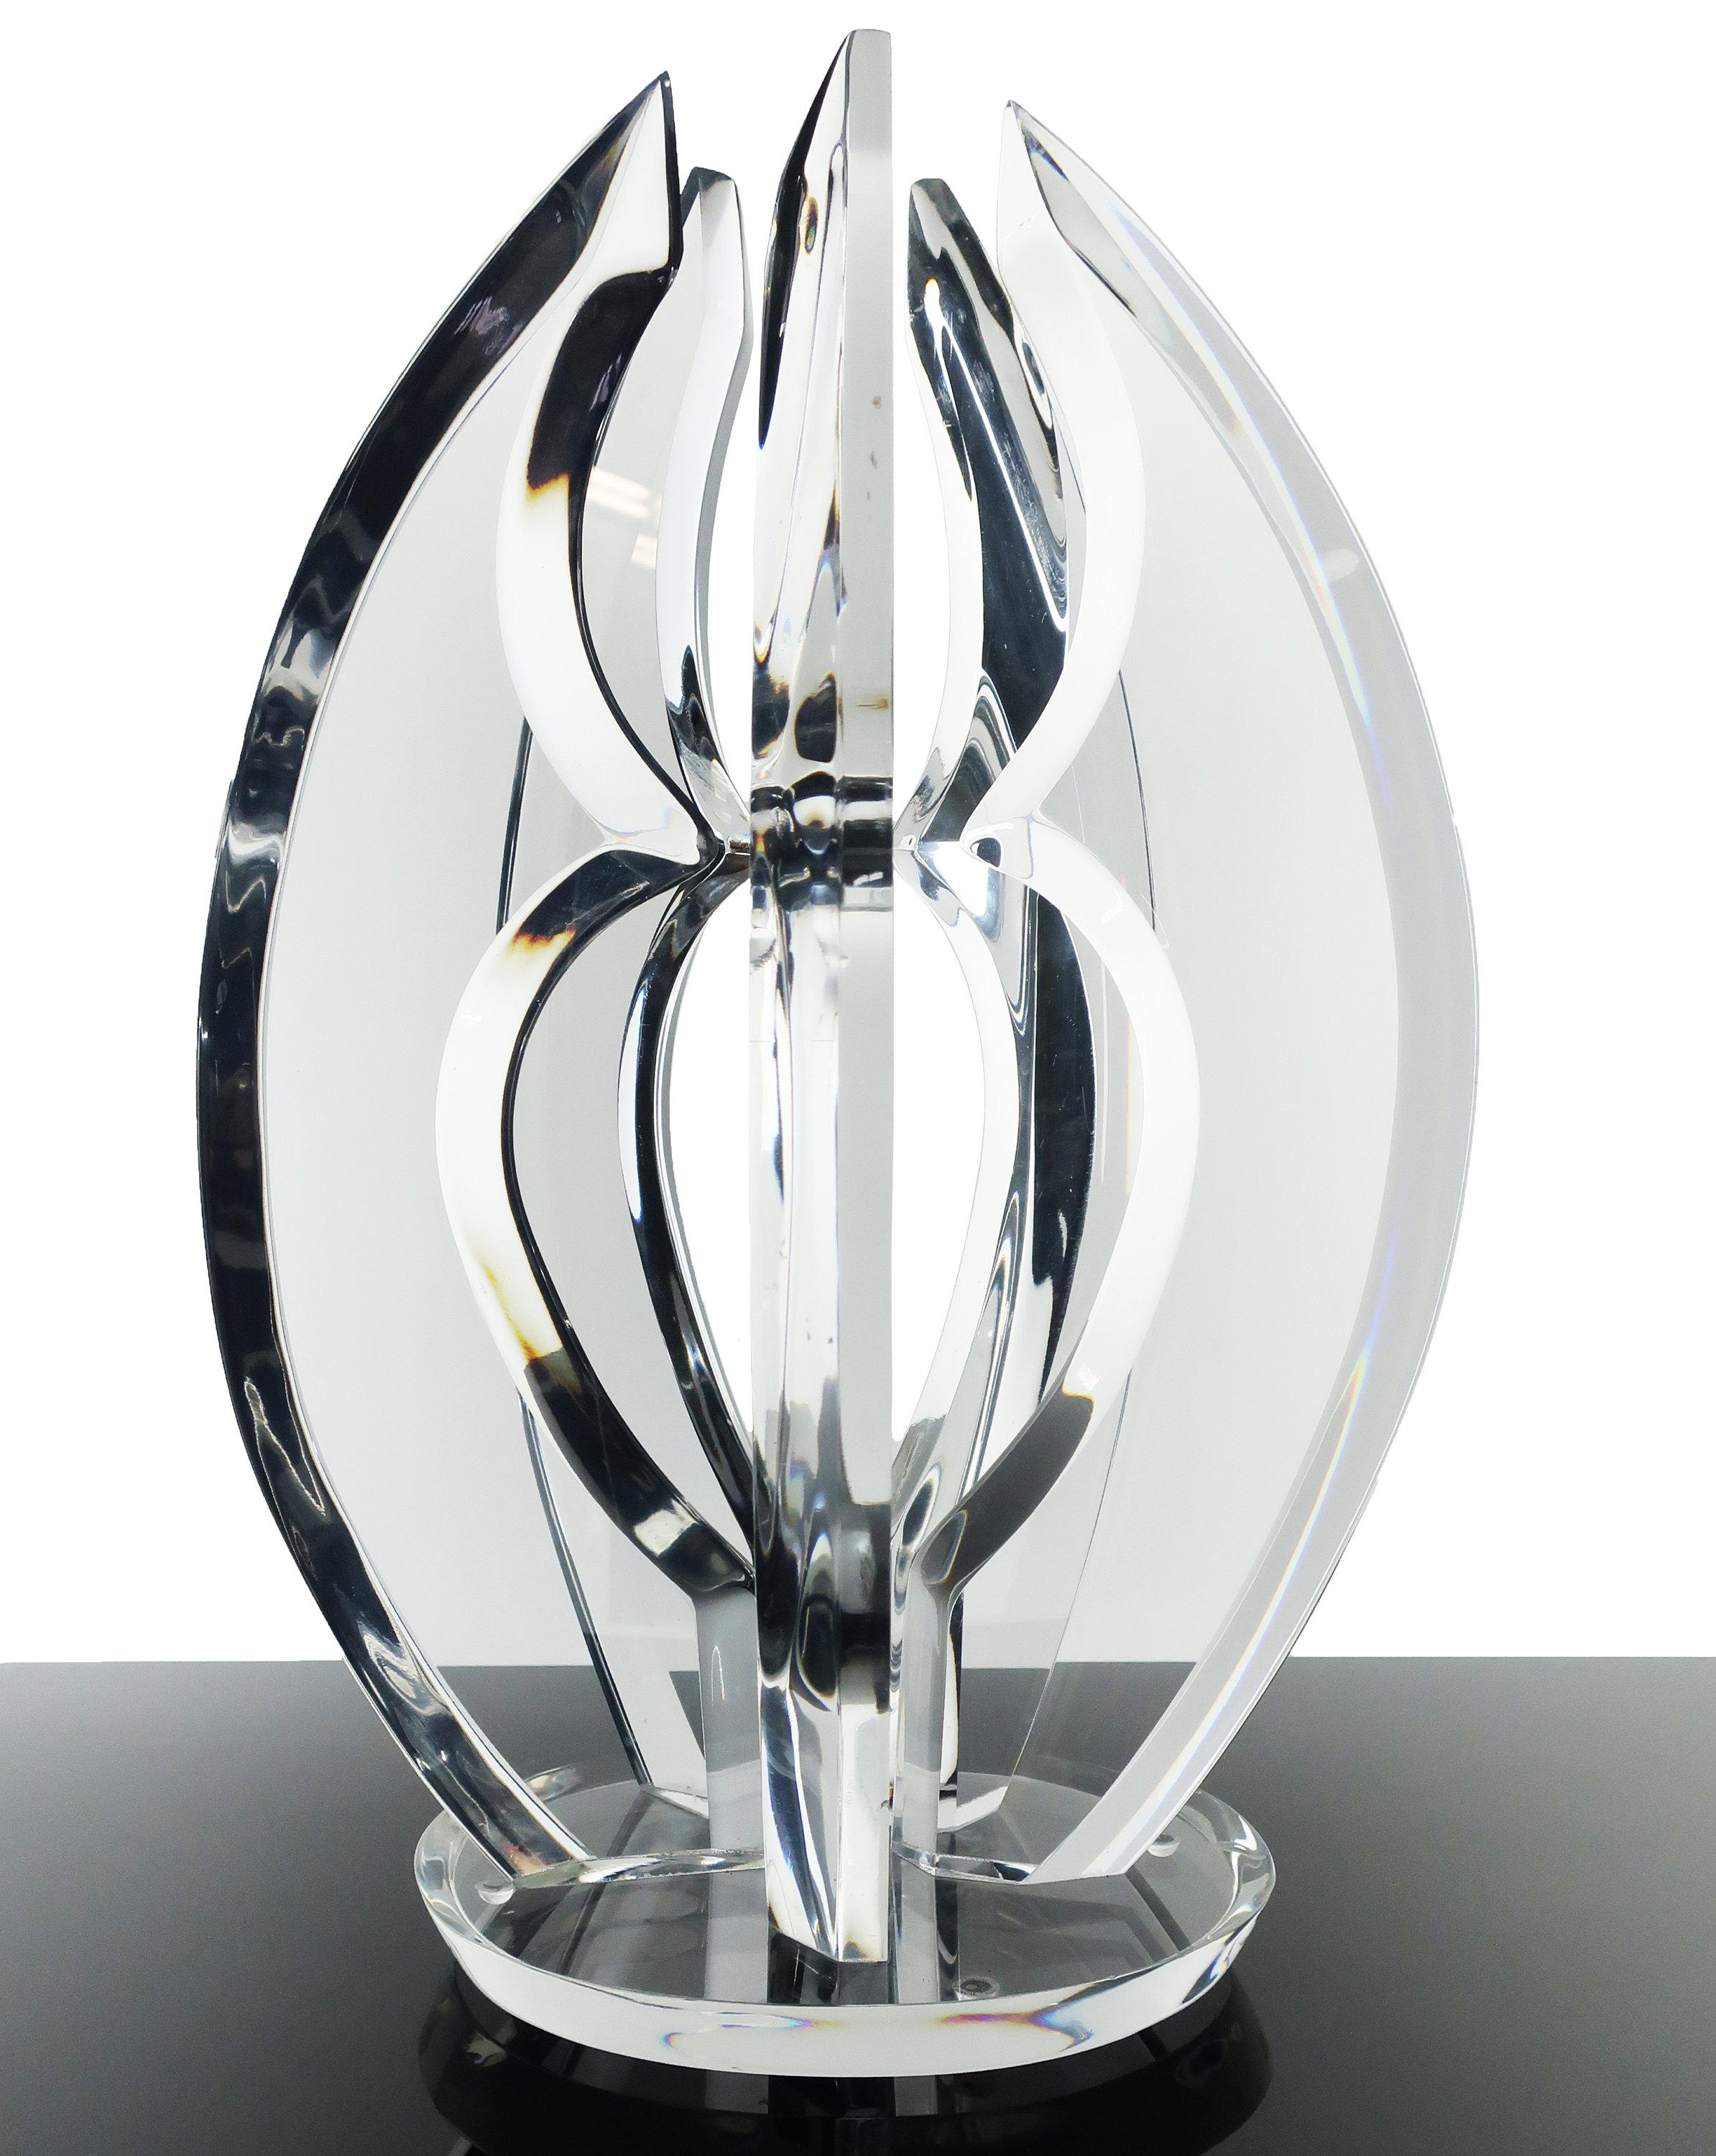 A fantastic curved Lucite sculpture in the style of Hivo Van Teal and Shlomi Haziza. Five identical beveled pieces mounted on a round base refract light and reflect colors to create an ever-changing object of art that is stunning as a shelf piece,